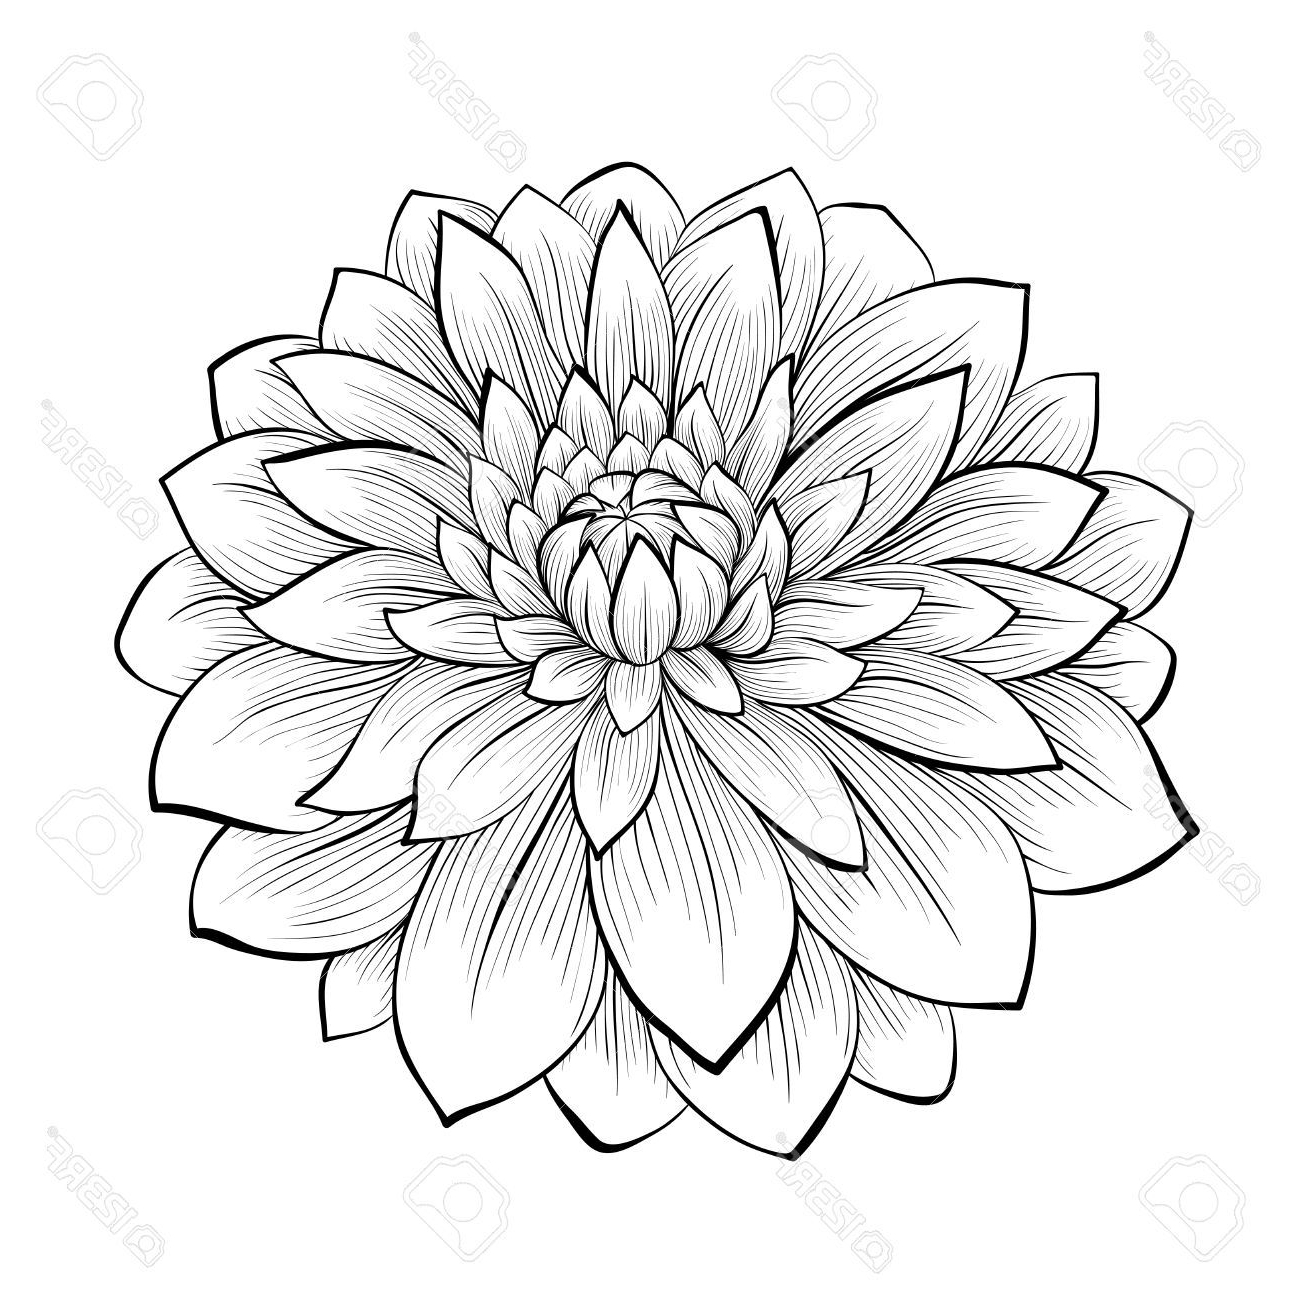 Great How To Draw A Dahlia Flower Step By Step in the world Don t miss out 